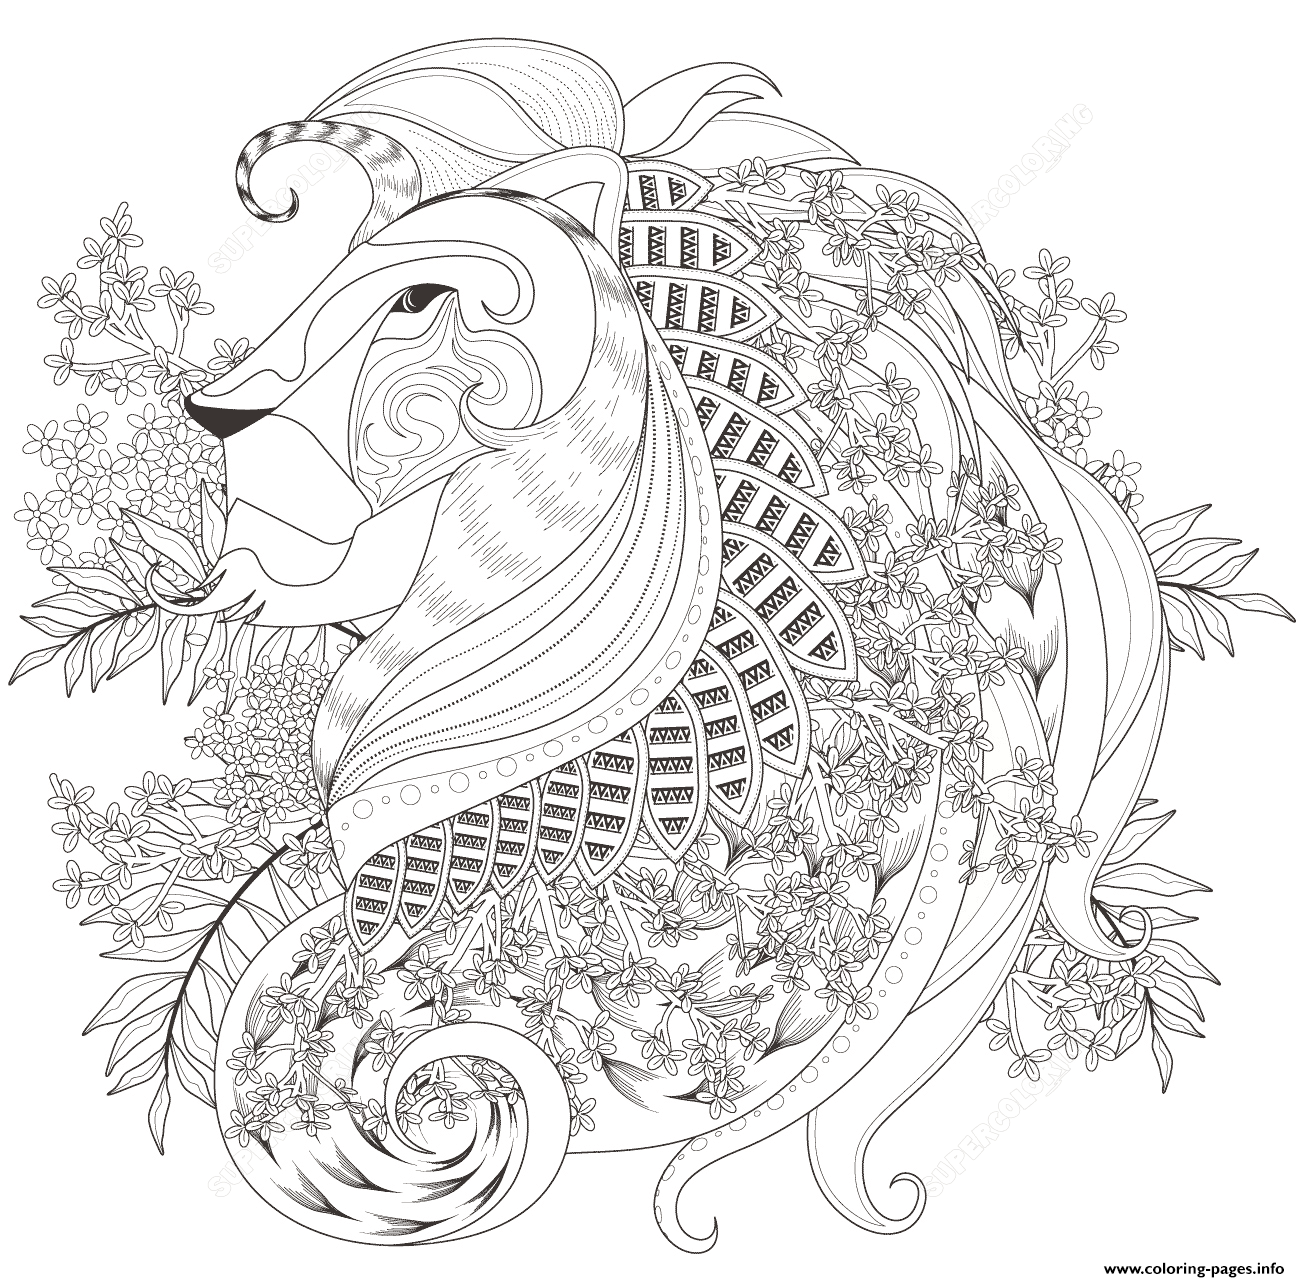 Get Lion Head Coloring Printable Lion Coloring Pages For Adults Images